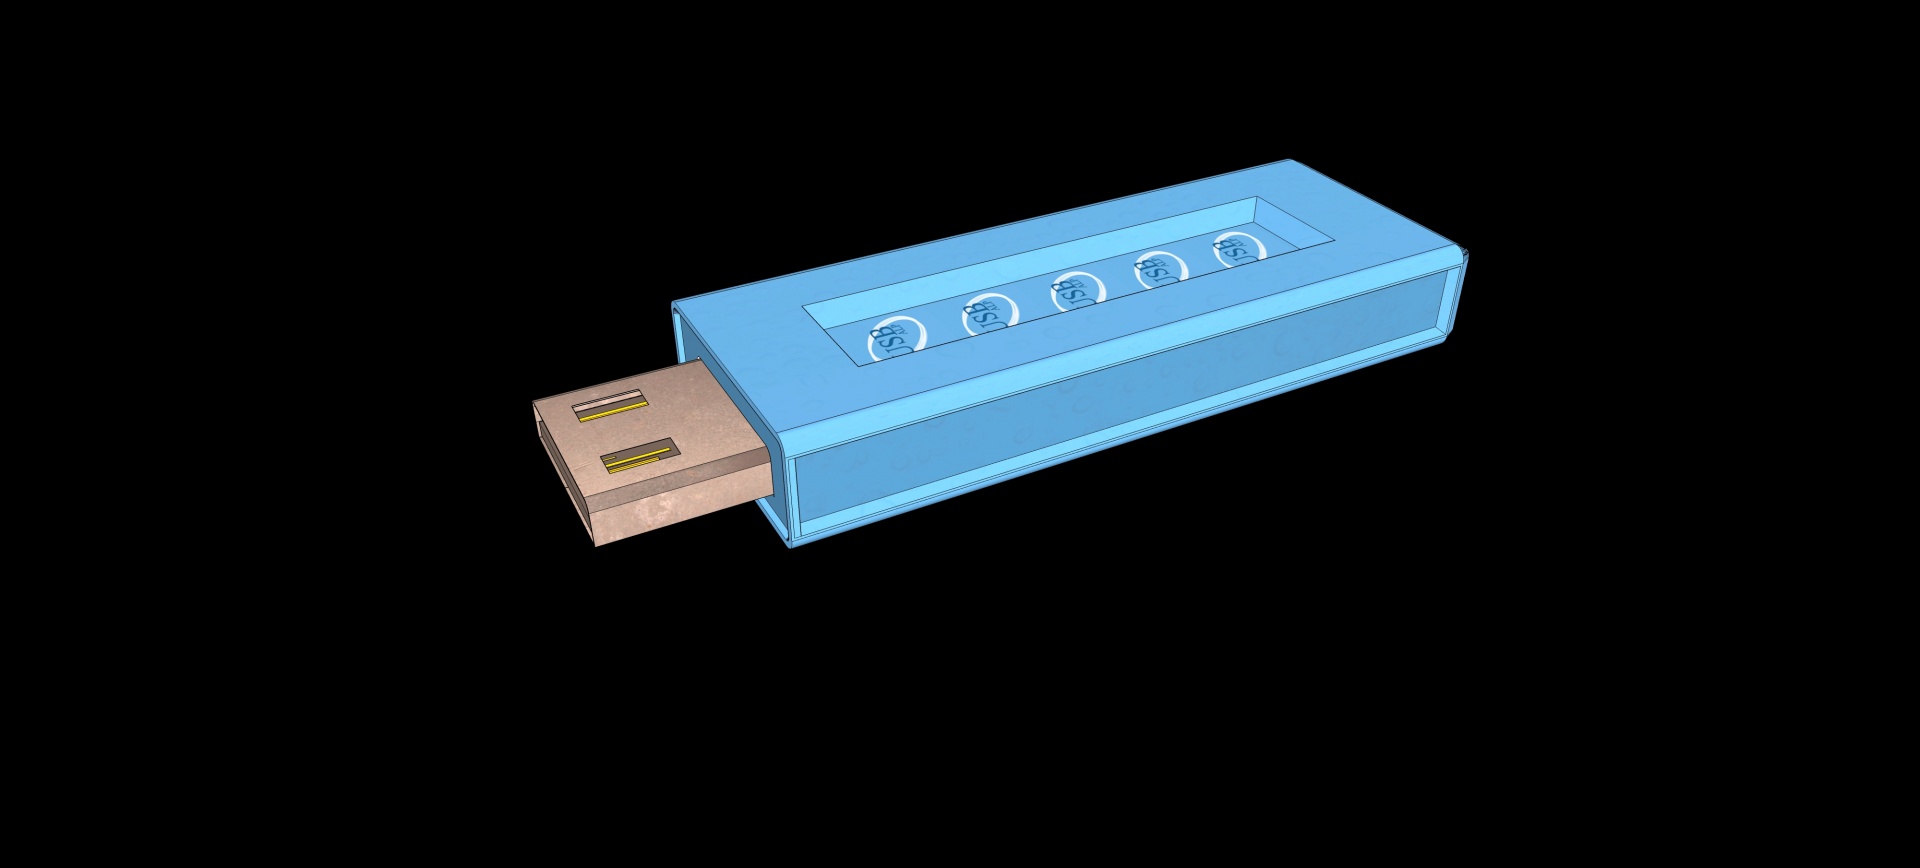 3d usb connector free photo